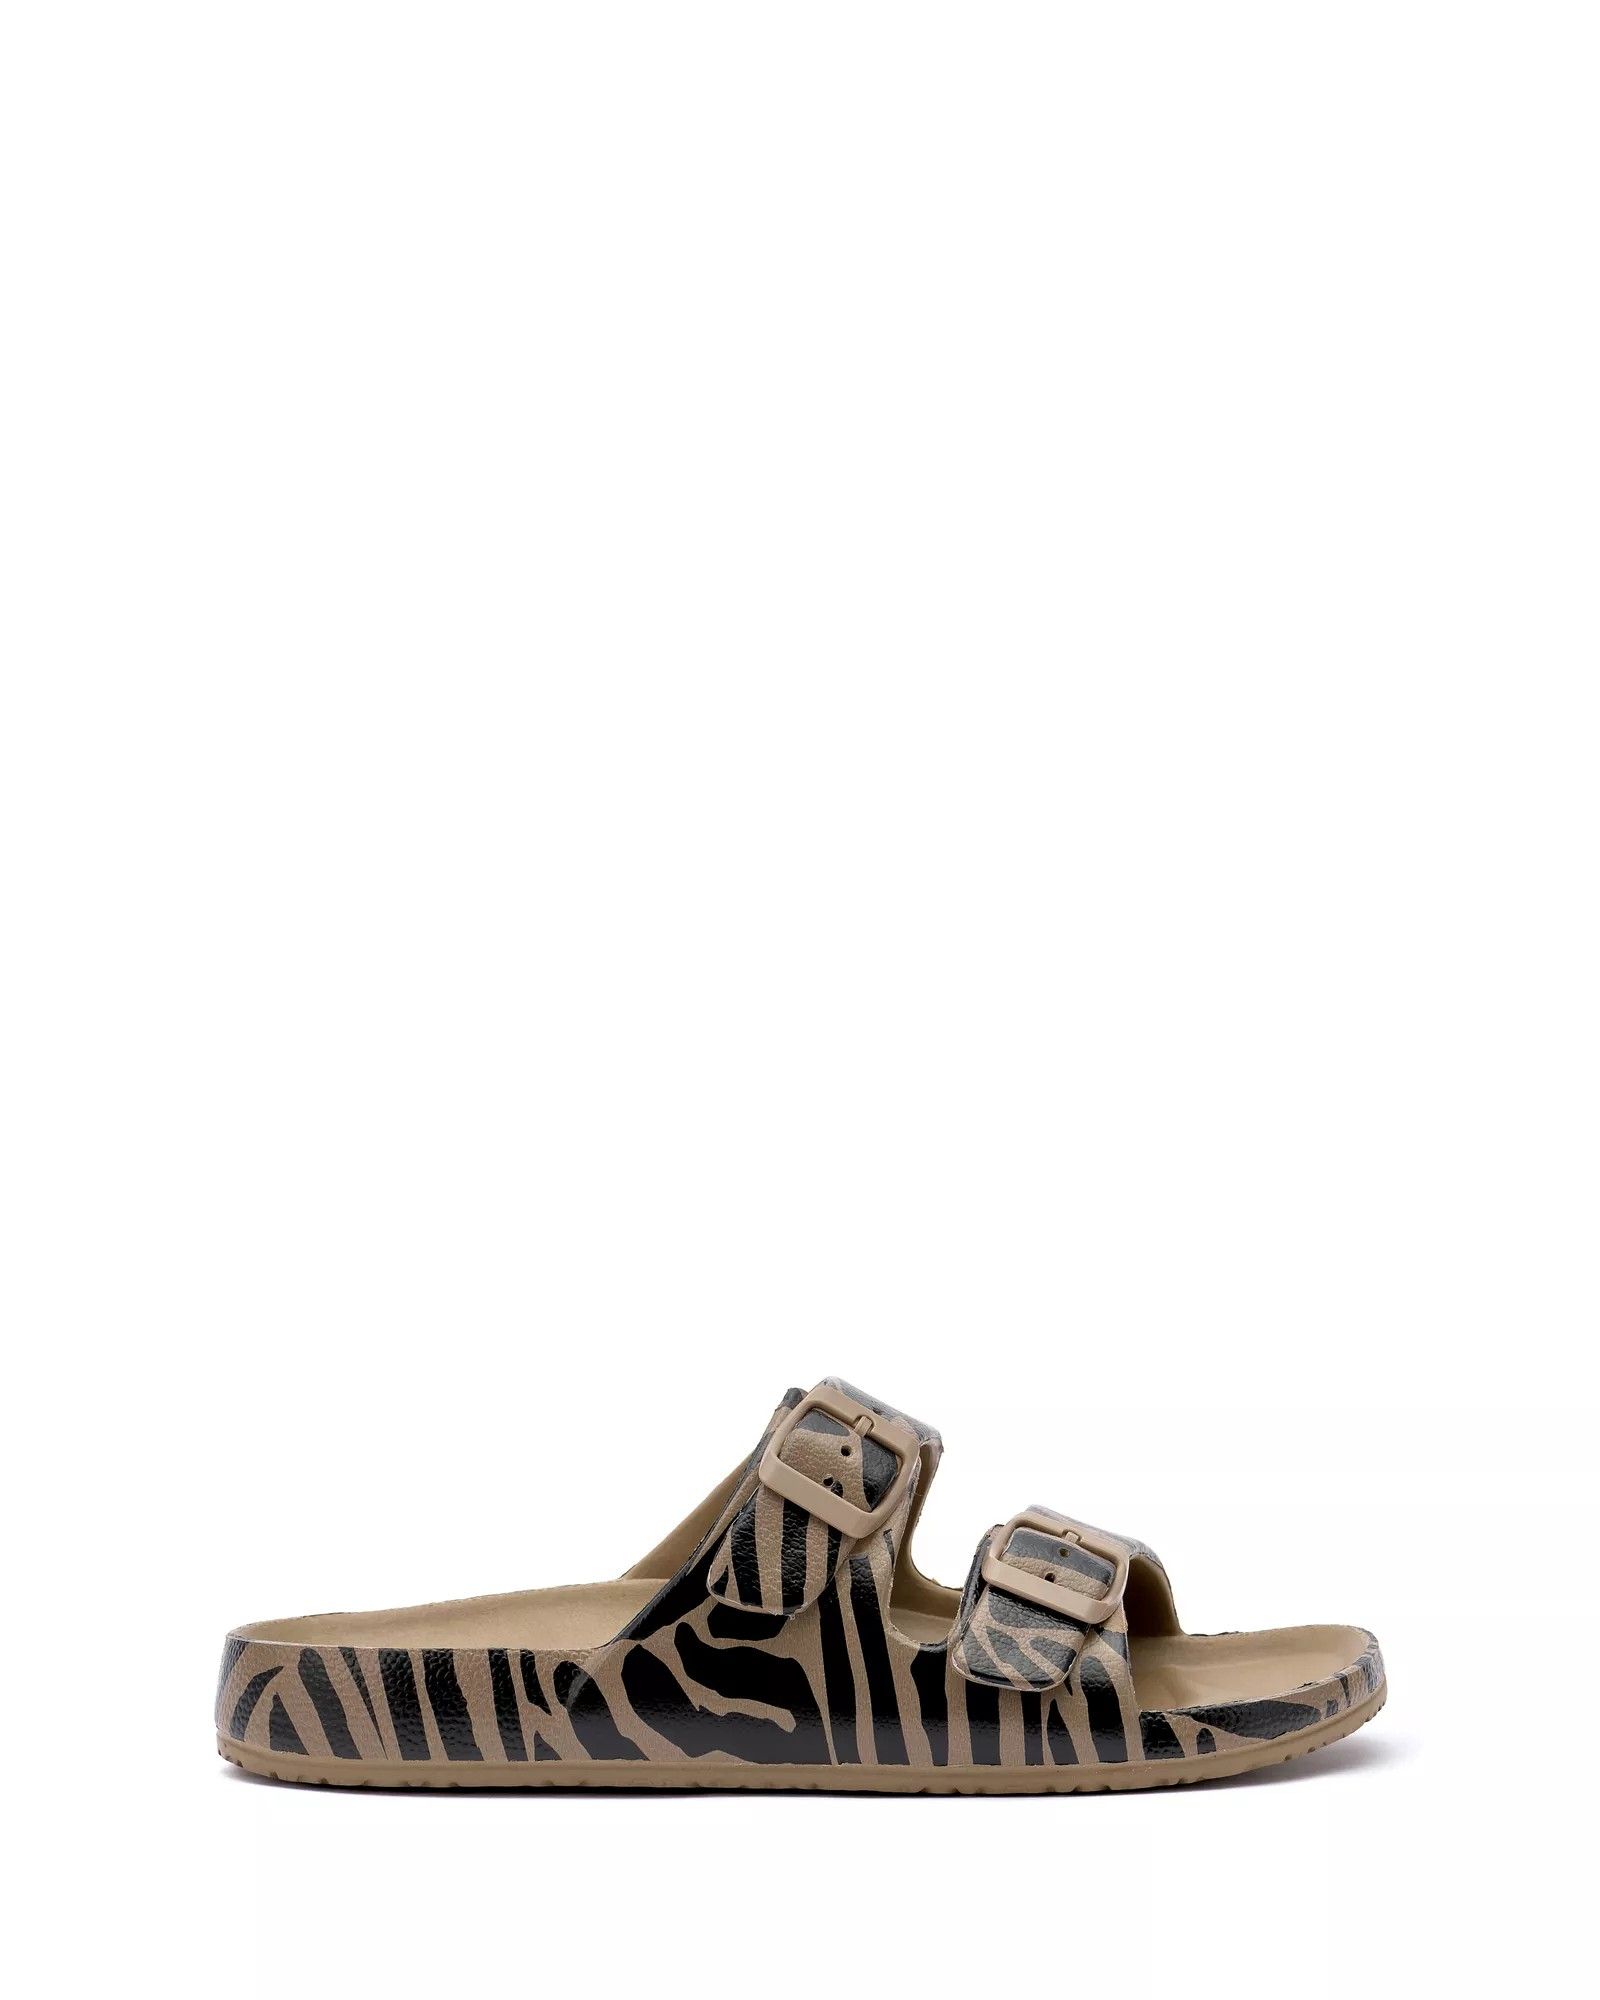 Mandial Two-Strap Slide | Vince Camuto